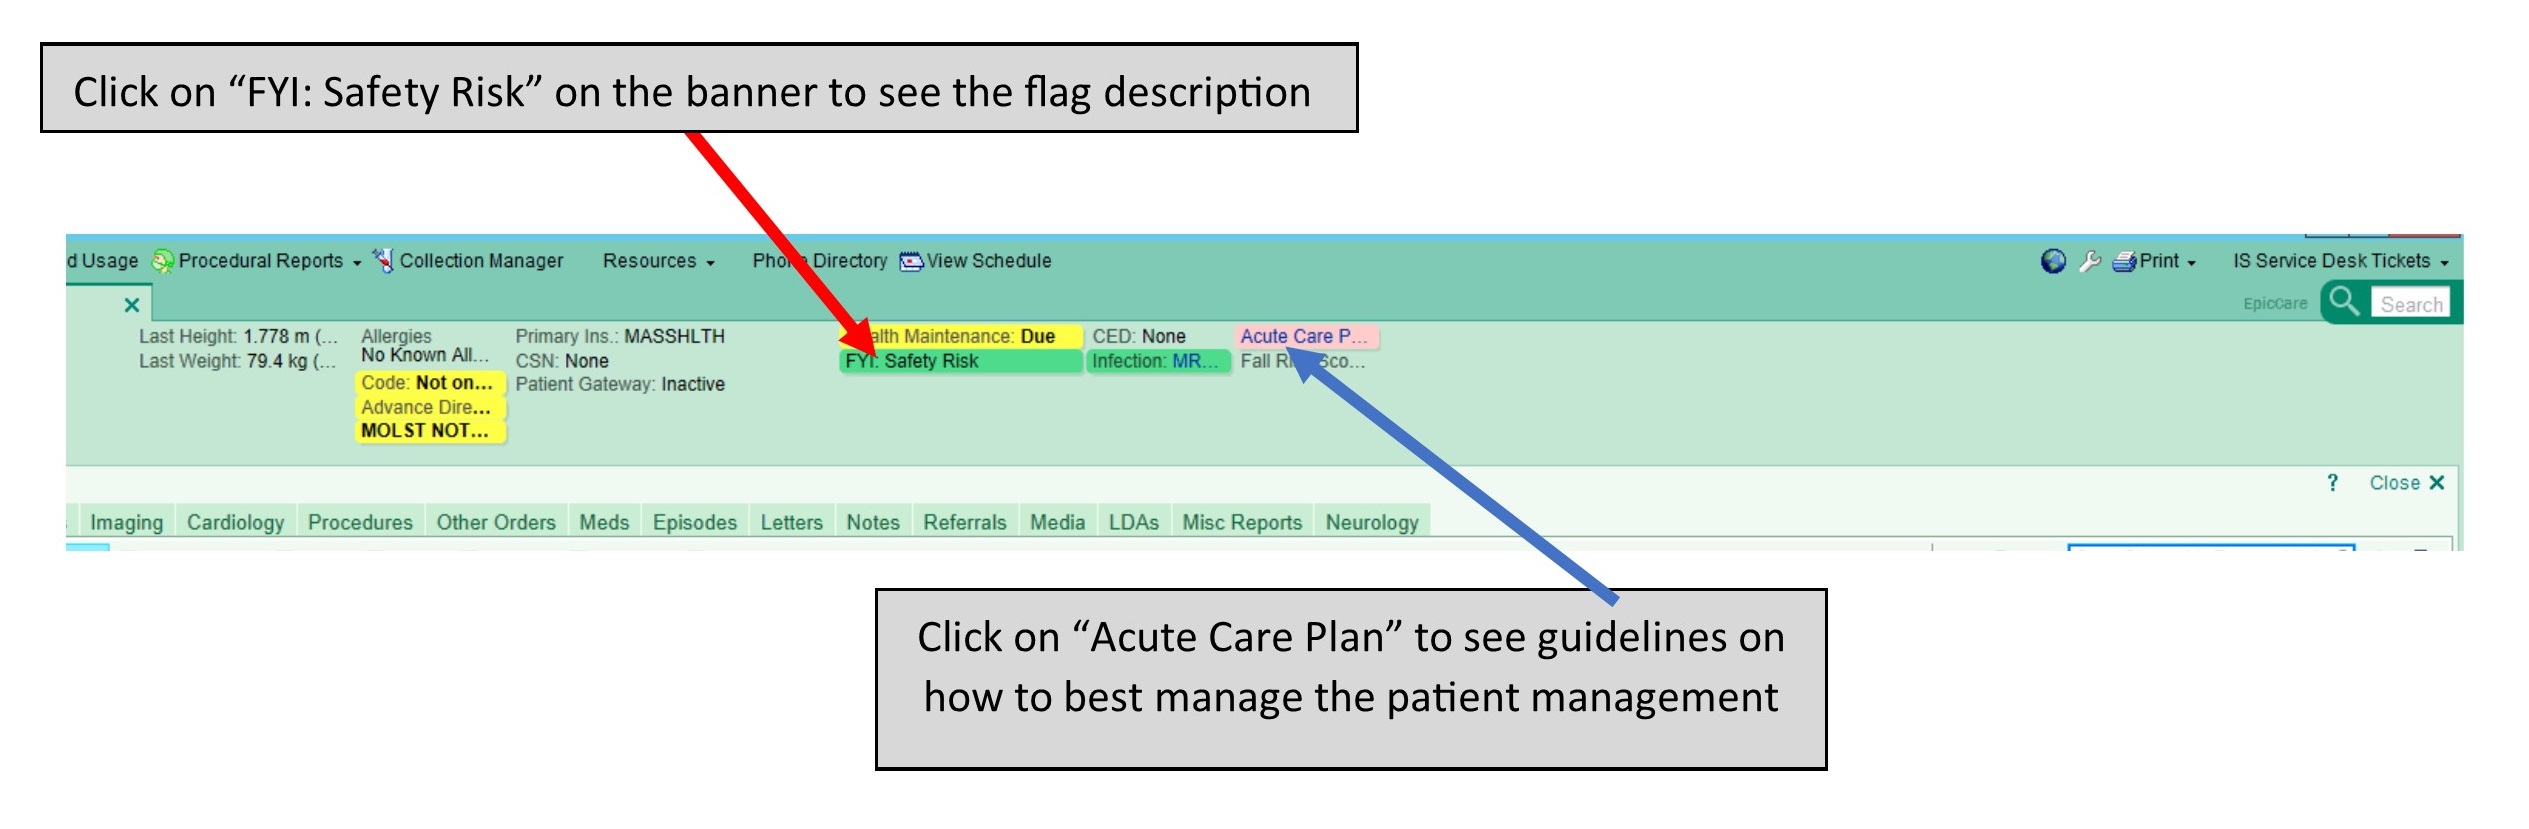 Safety Flag and Acute Care Plan in Epic